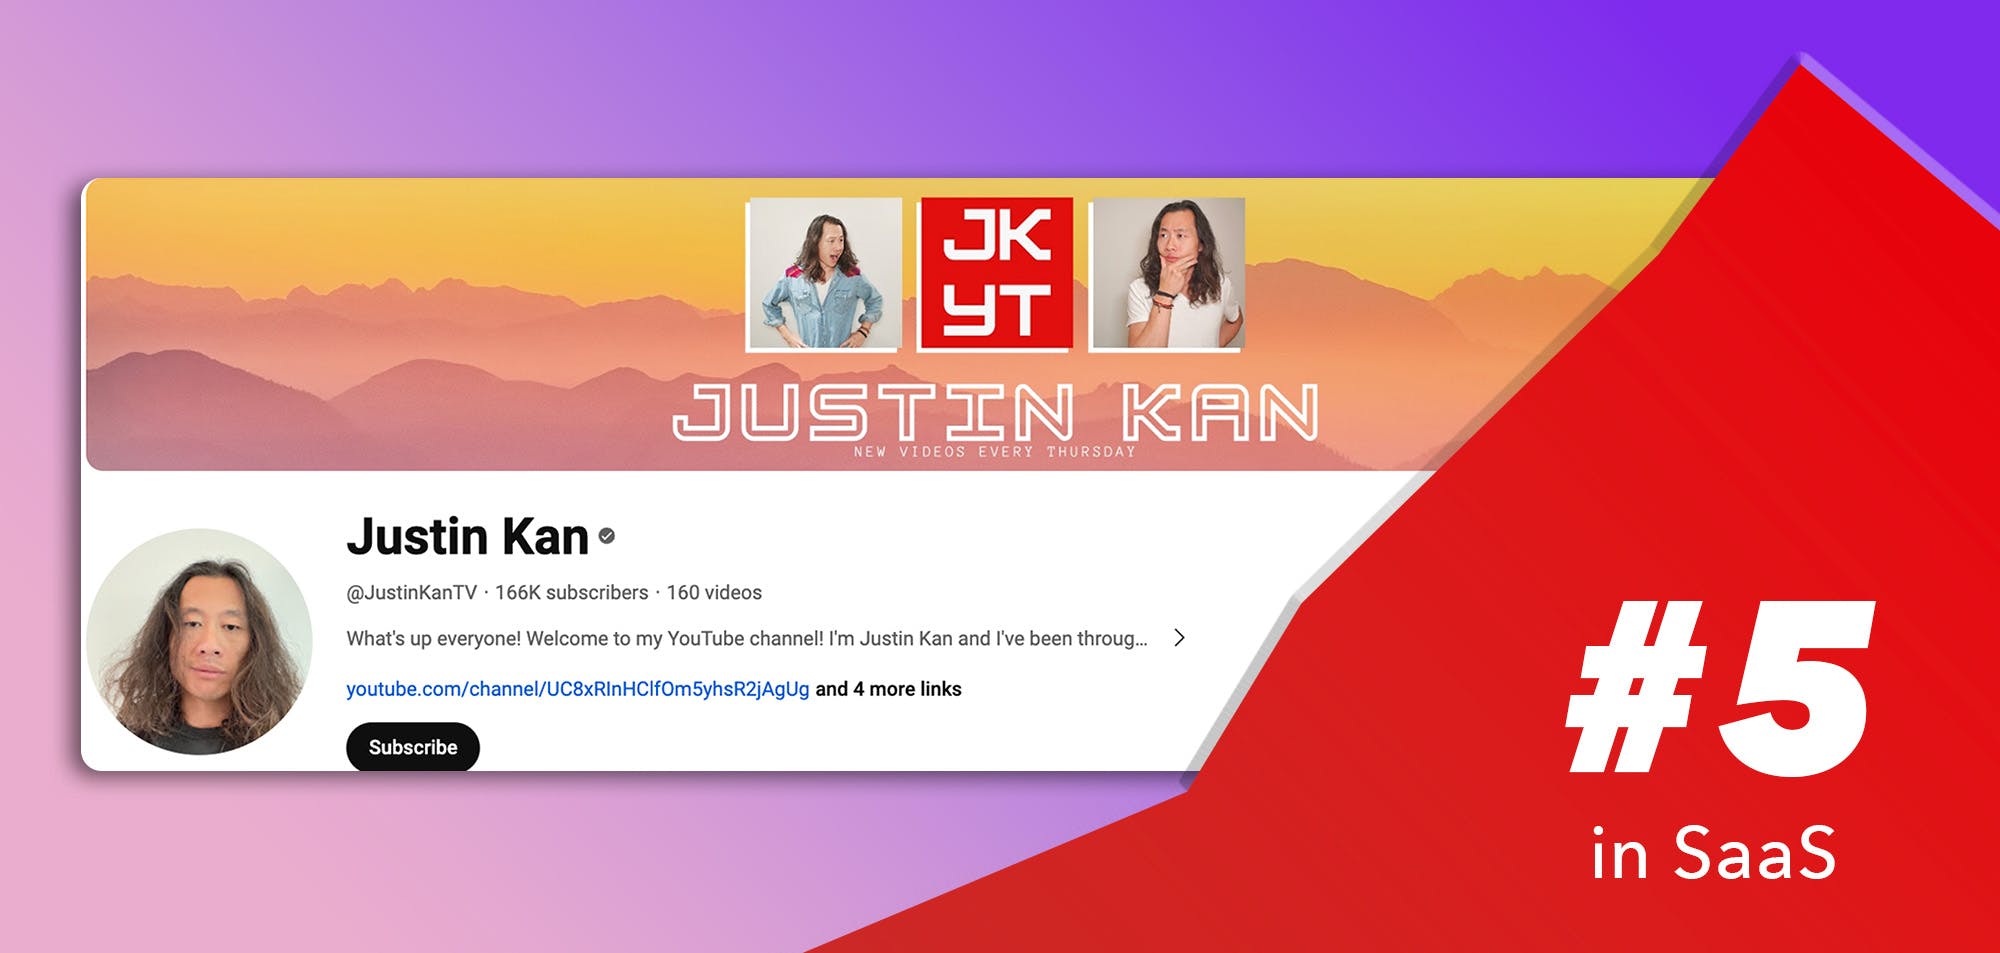 Justin Kan - Founder of Twitch, VC, and Mentor in Startup Ecosystem